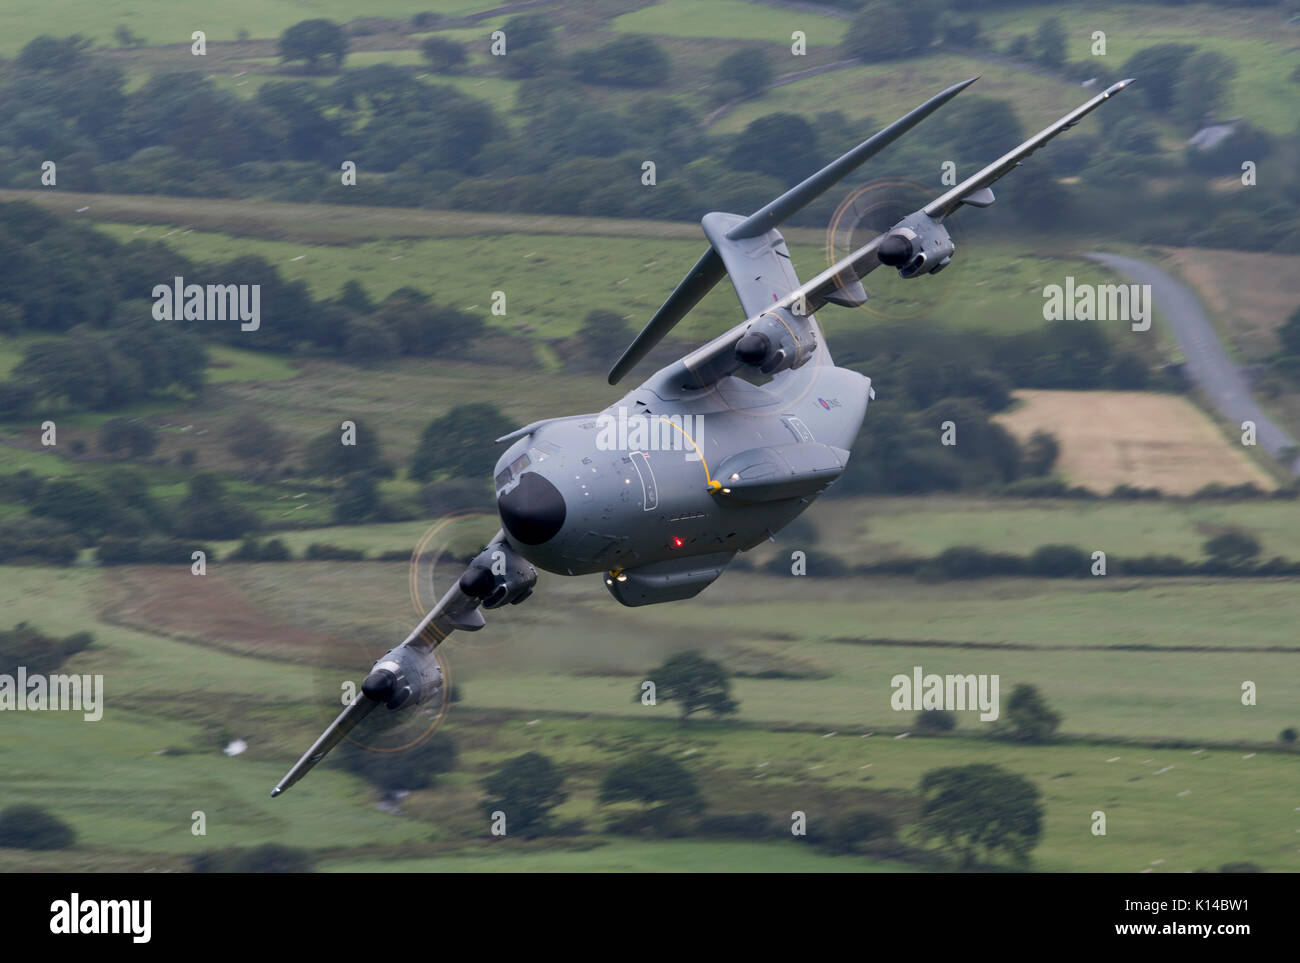 RAF Atlas A400M on a low level training flight in the Mach Loop area of Snowdonia Wales. Stock Photo